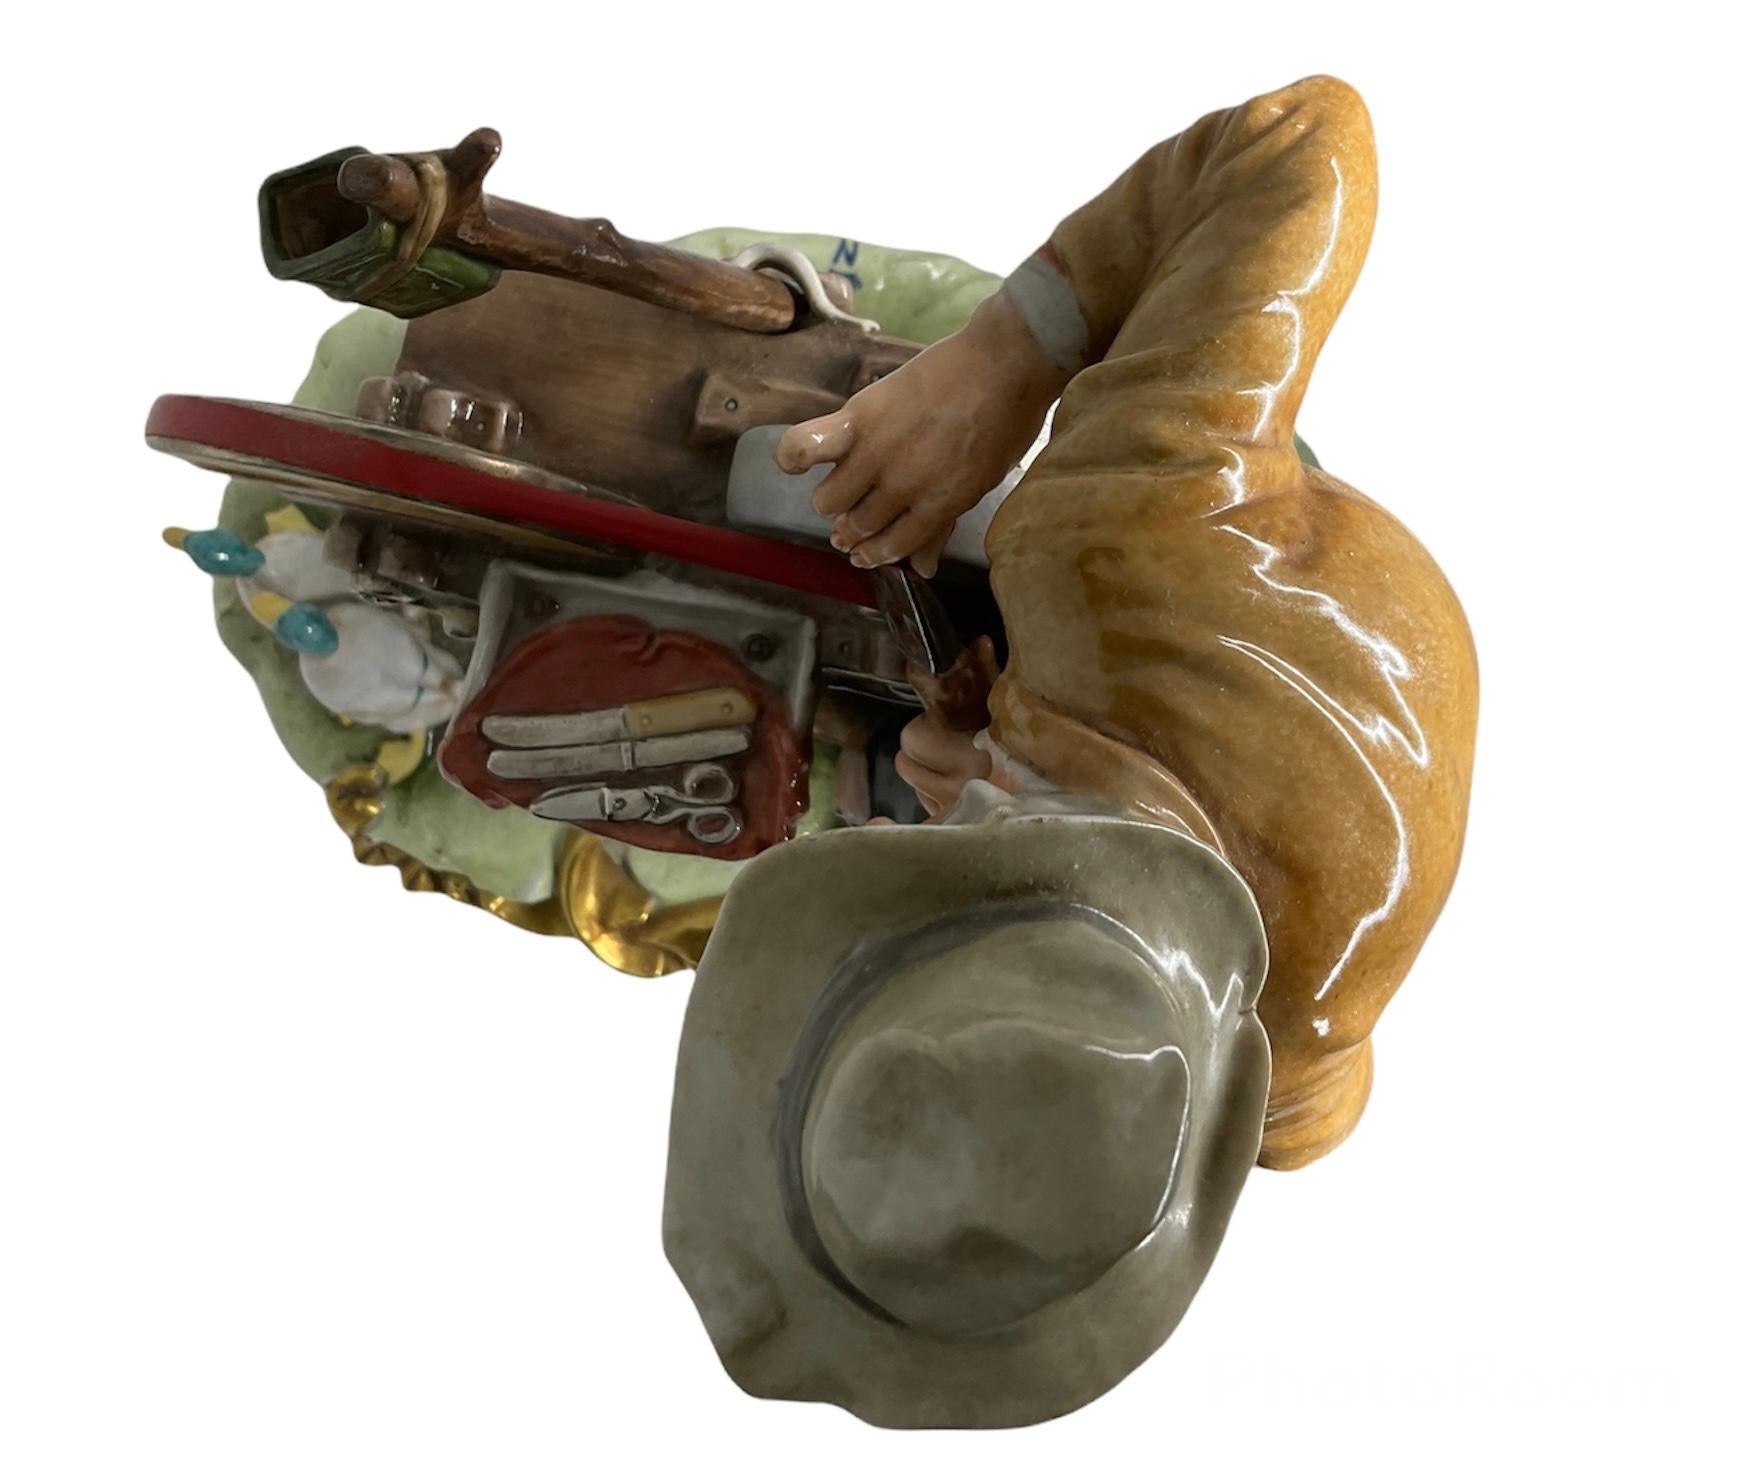 This is a large heavy Capodimonte glazed porcelain sculpture of a knife sharpener. It features an old man with a grey hat standing up in front of the knife sharpening machine working in a knife. He is wearing a brown jacket, green pants, high socks